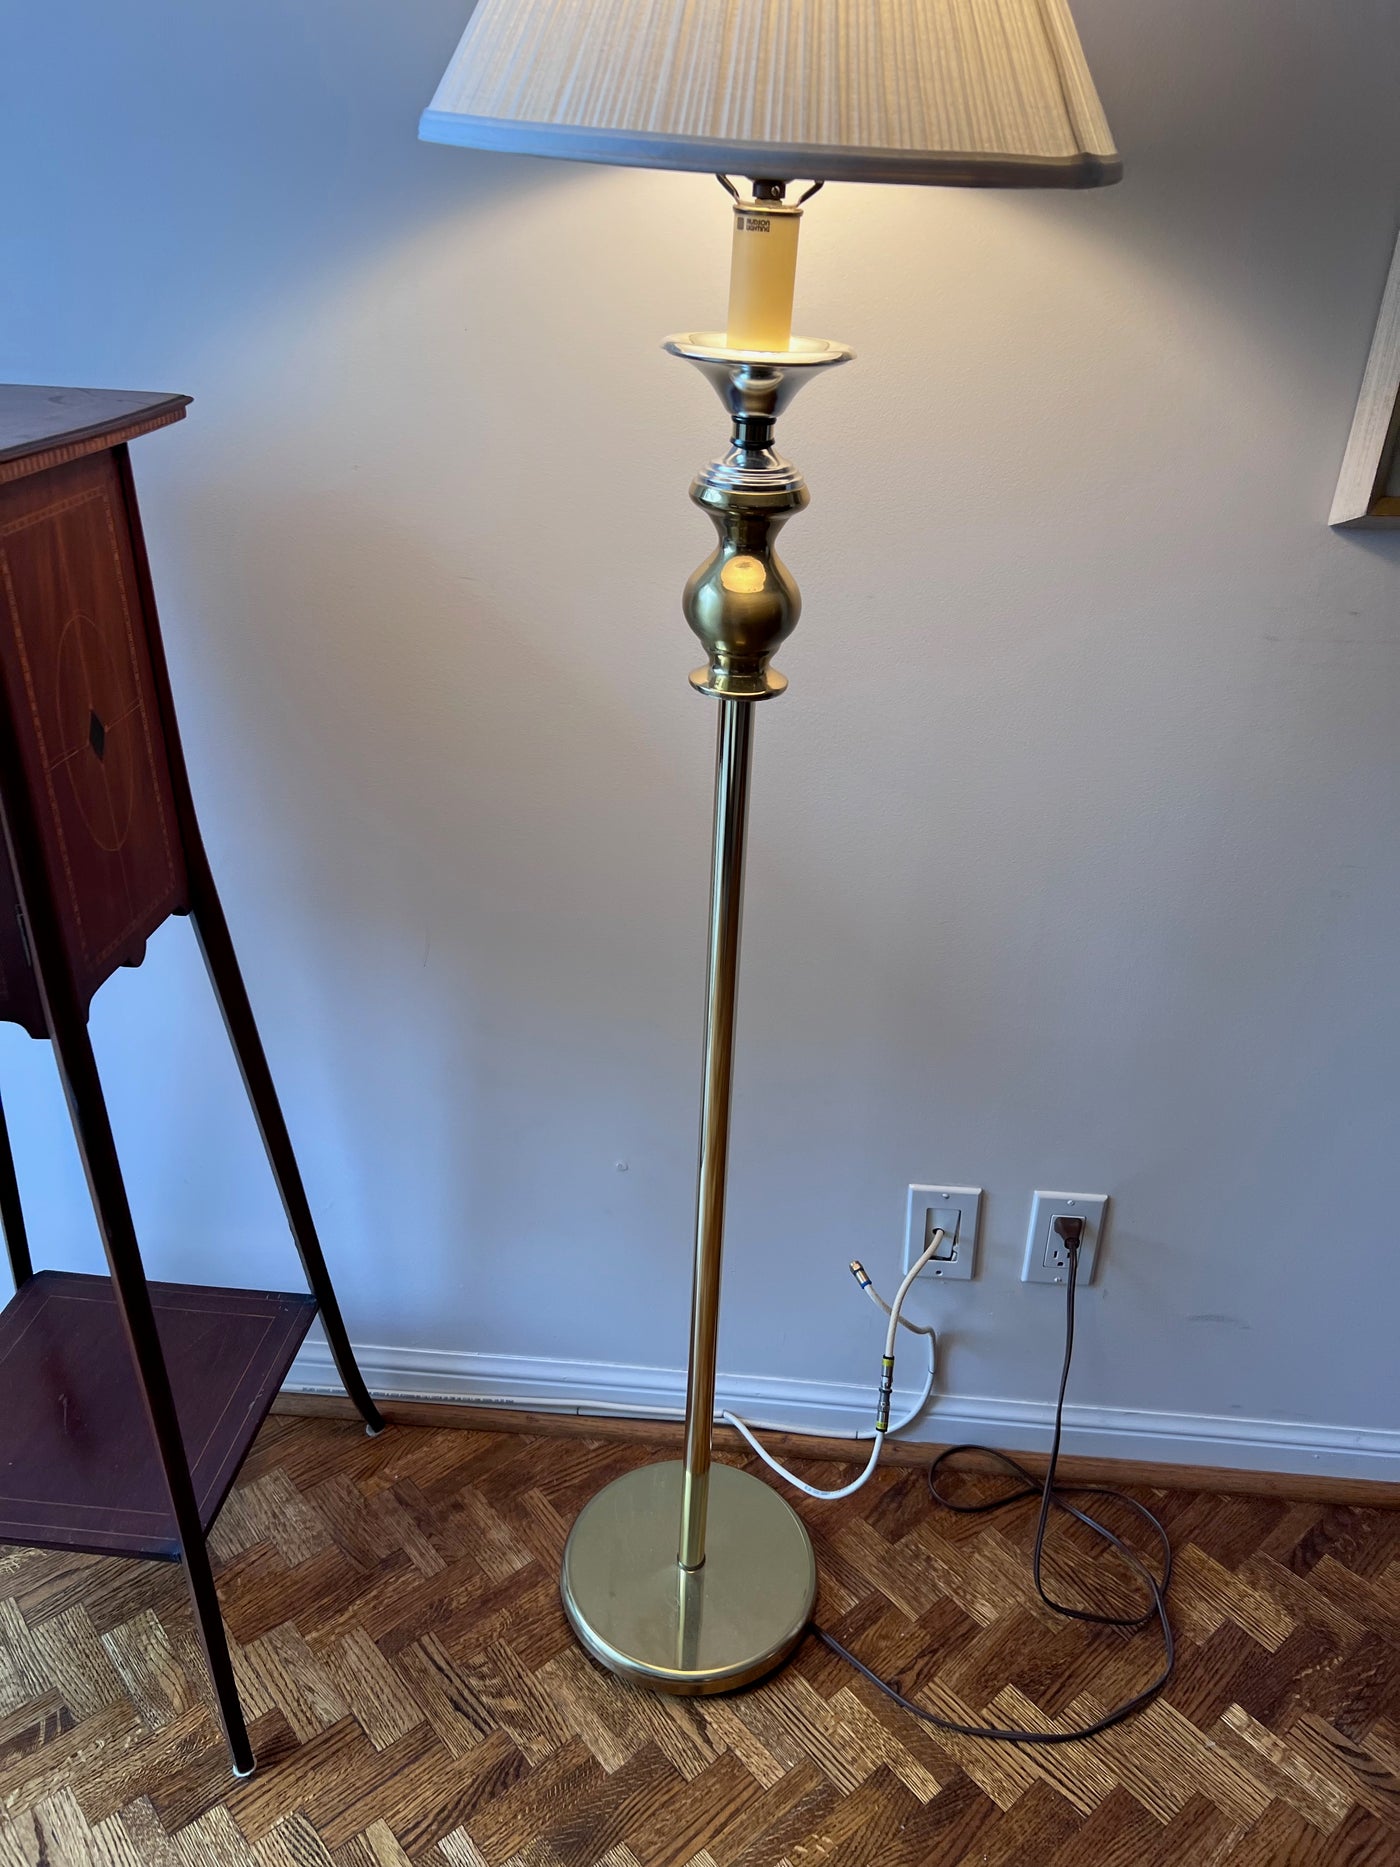 Authentic 'Stiffel' Brass Table Lamp – Sell My Stuff Canada